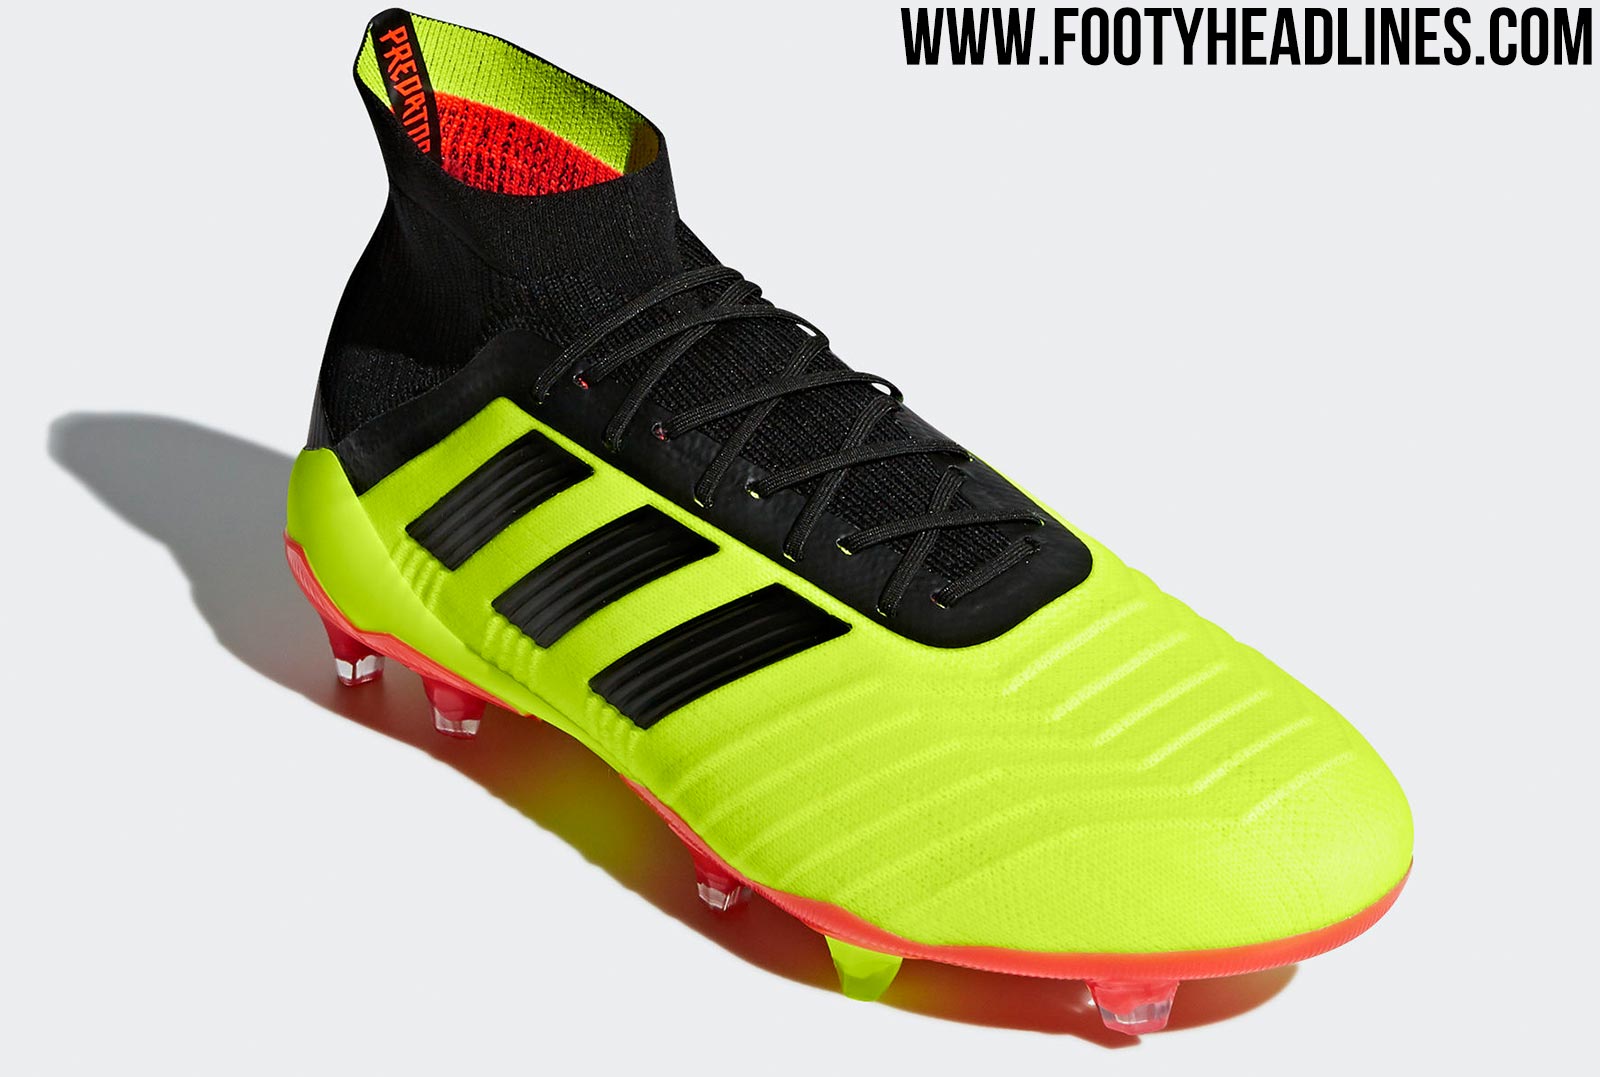 Energy Mode' Adidas Predator 2018 Cup Boots - Footy